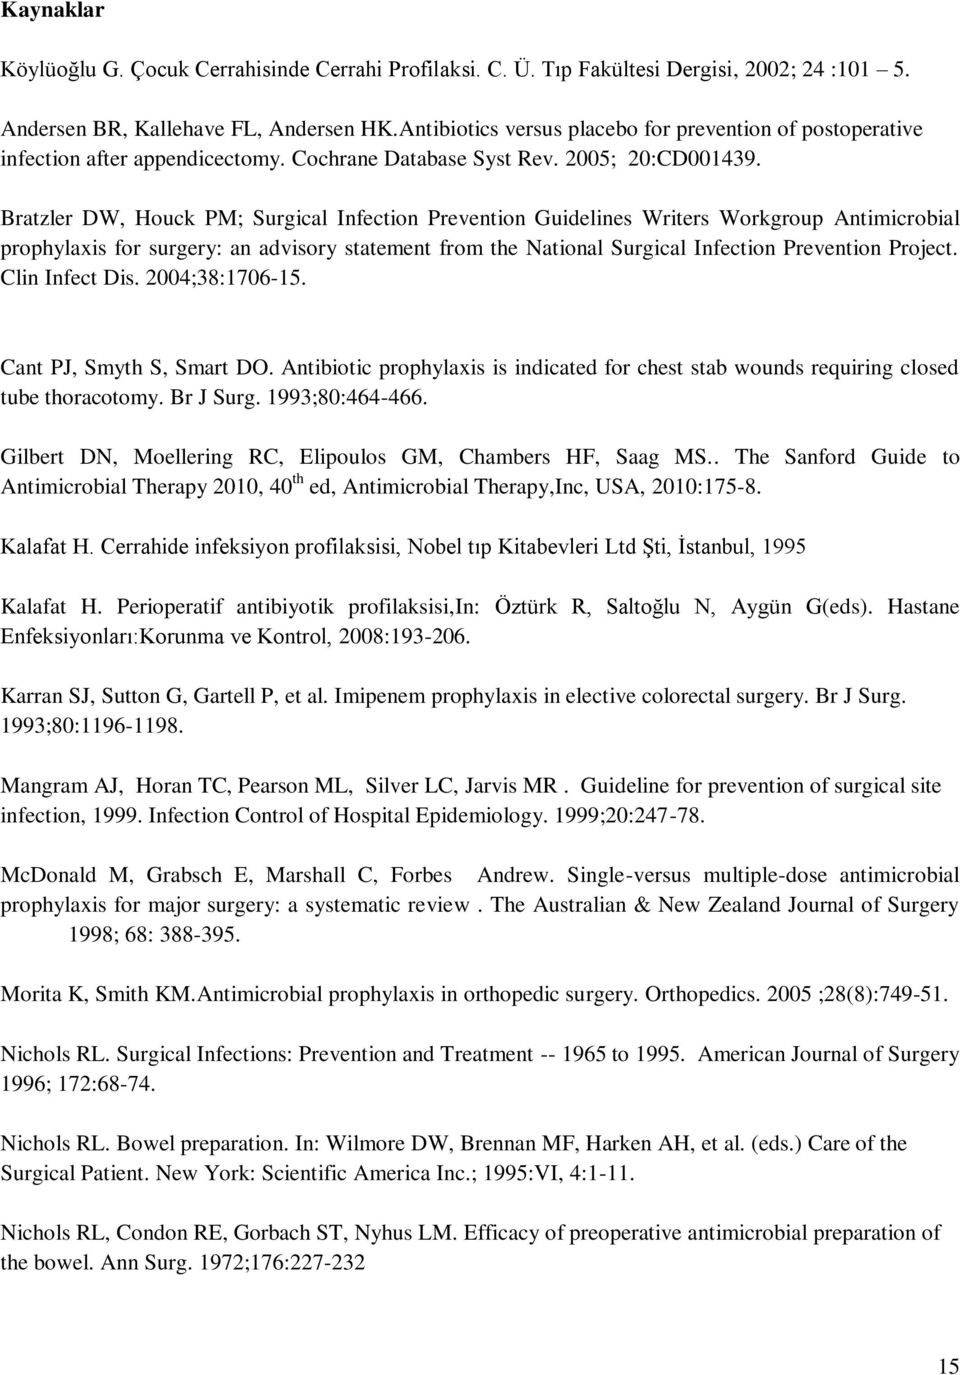 Bratzler DW, Houck PM; Surgical Infection Prevention Guidelines Writers Workgroup Antimicrobial prophylaxis for surgery: an advisory statement from the National Surgical Infection Prevention Project.